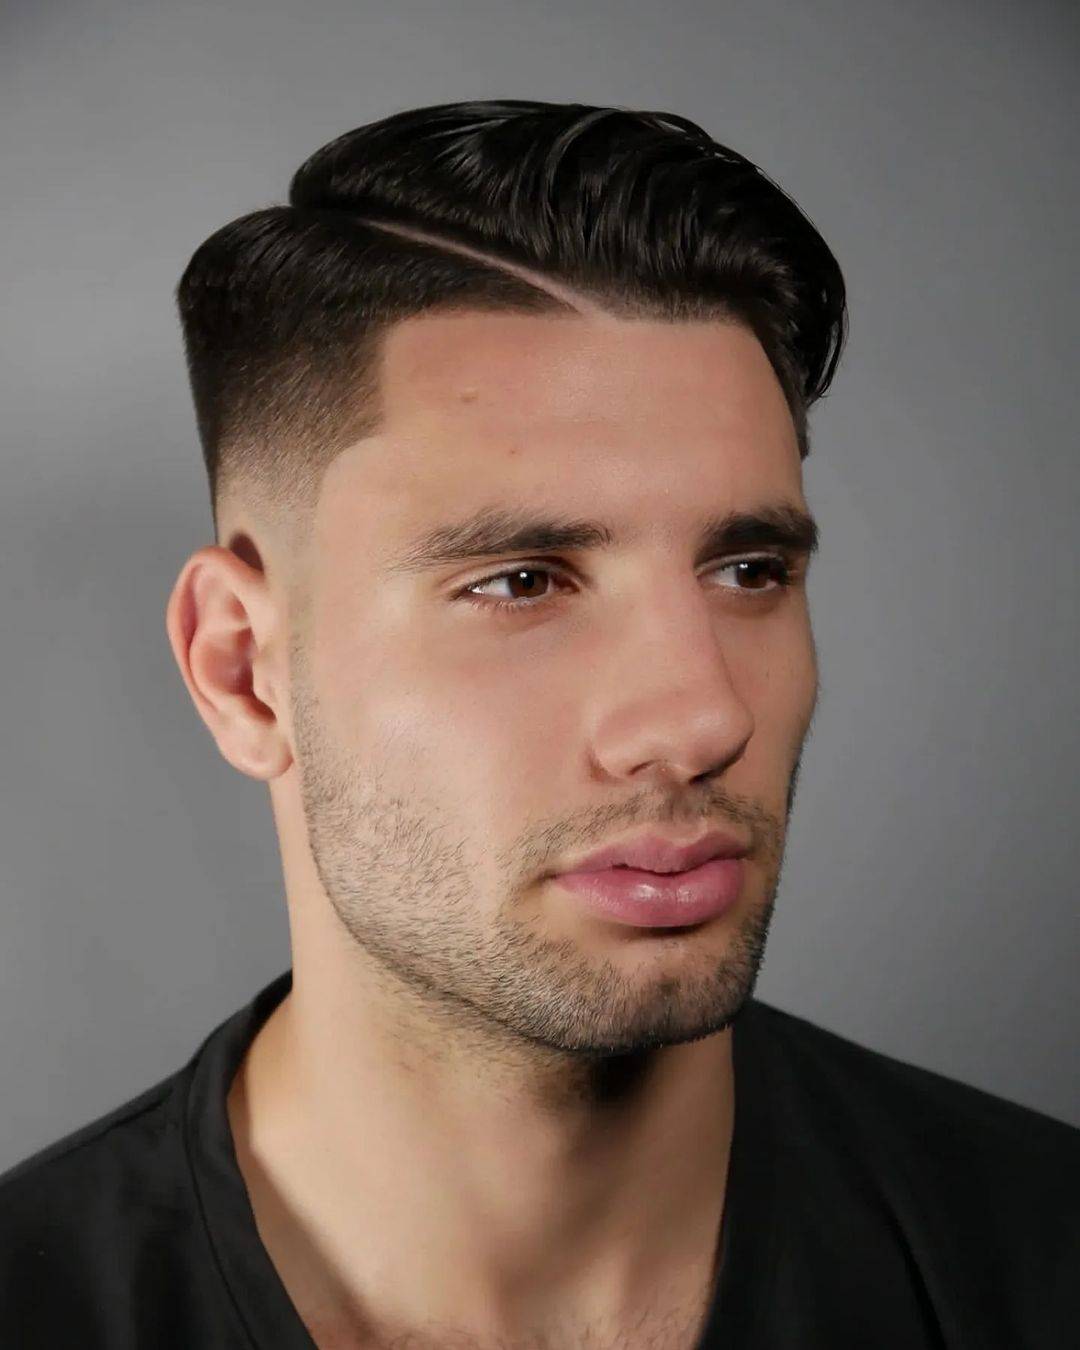 Hairstyle for Men 201 best haircut for men | haircut for men | haircuts for men Haircut for Men